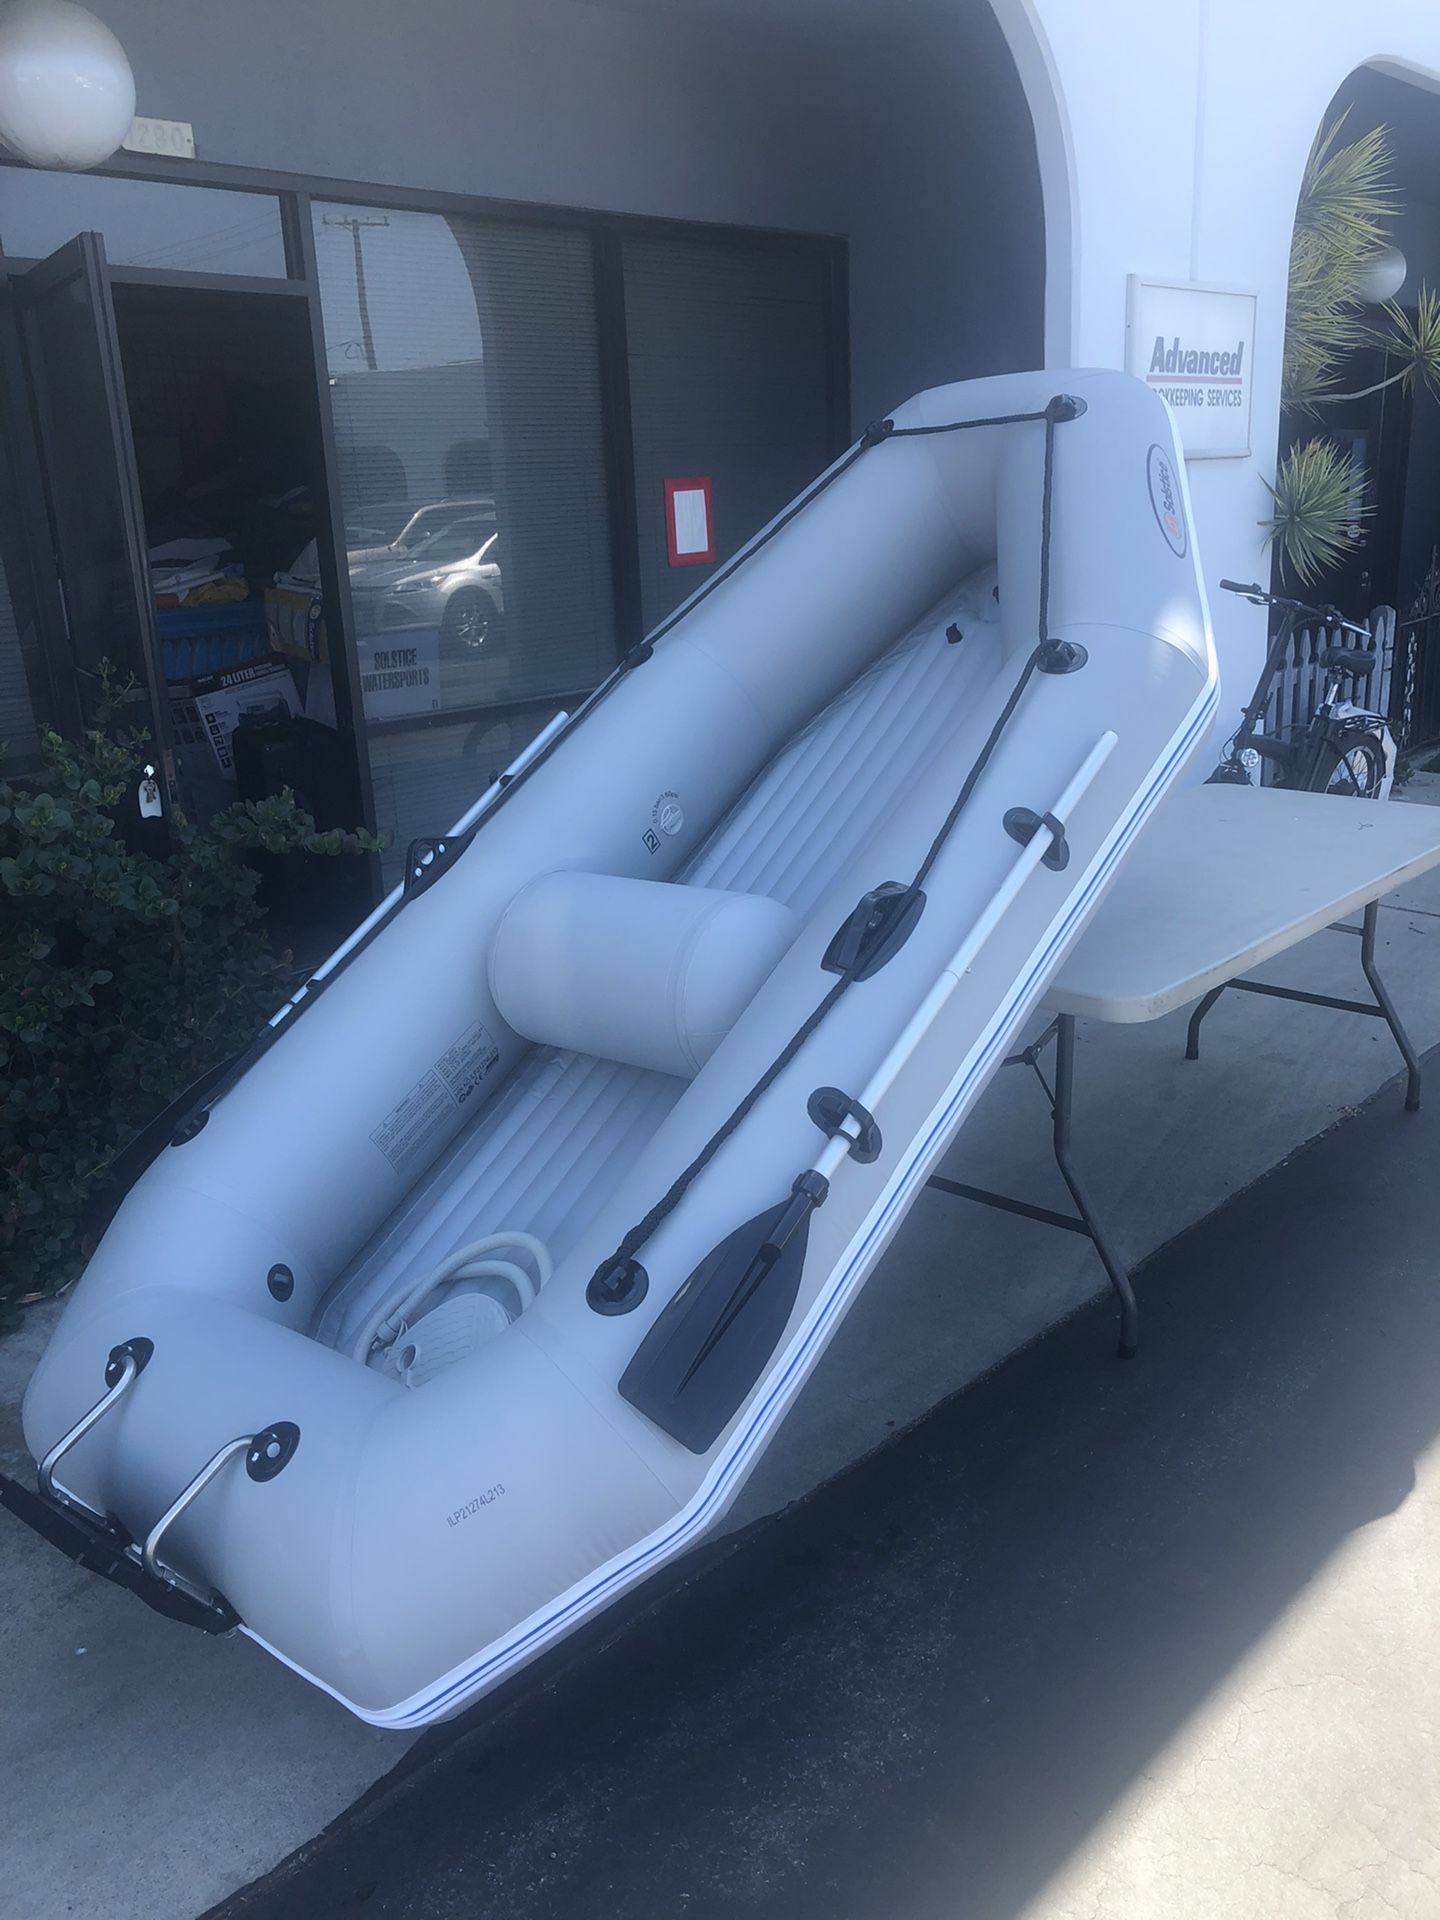 10’ Inflatable Boat Fabric Reinforced Come With Seat, Pair Of Oars, pump, motor mount, carry bag